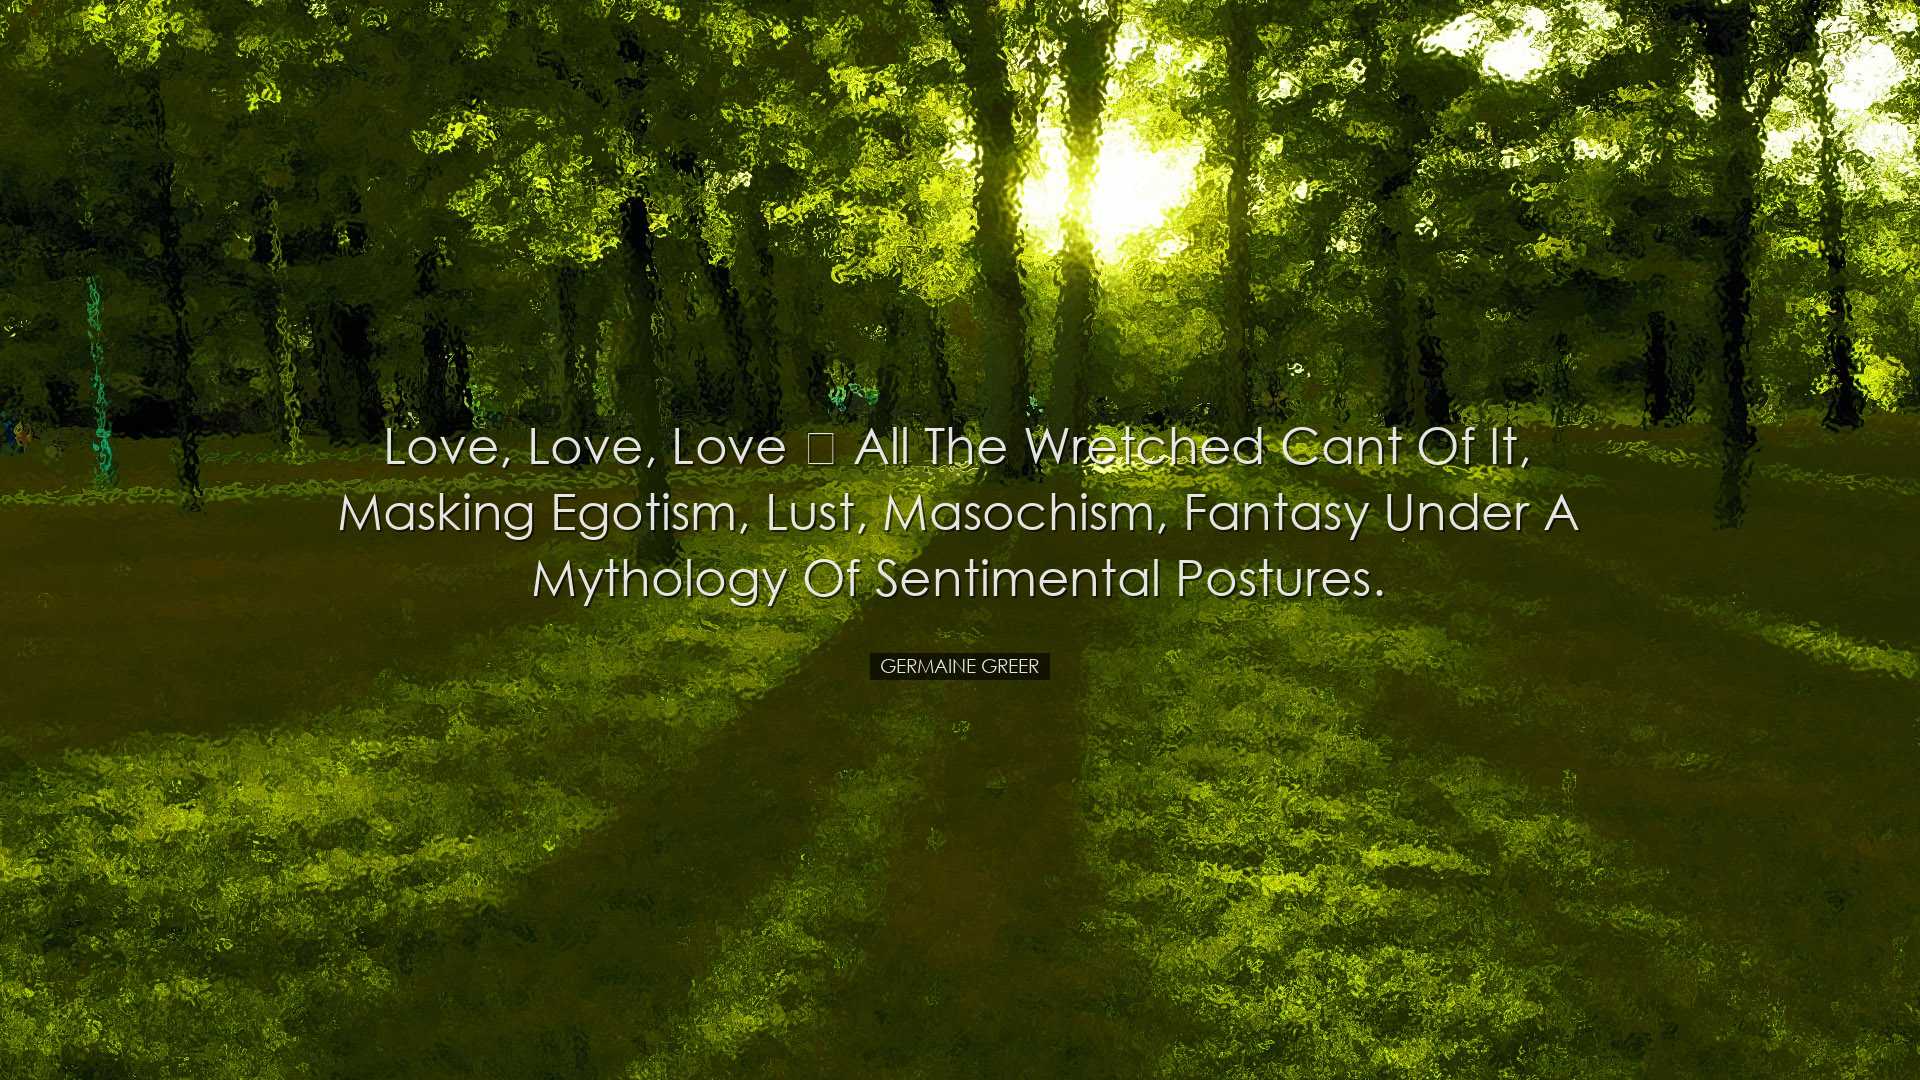 Love, love, love — all the wretched cant of it, masking egotism,